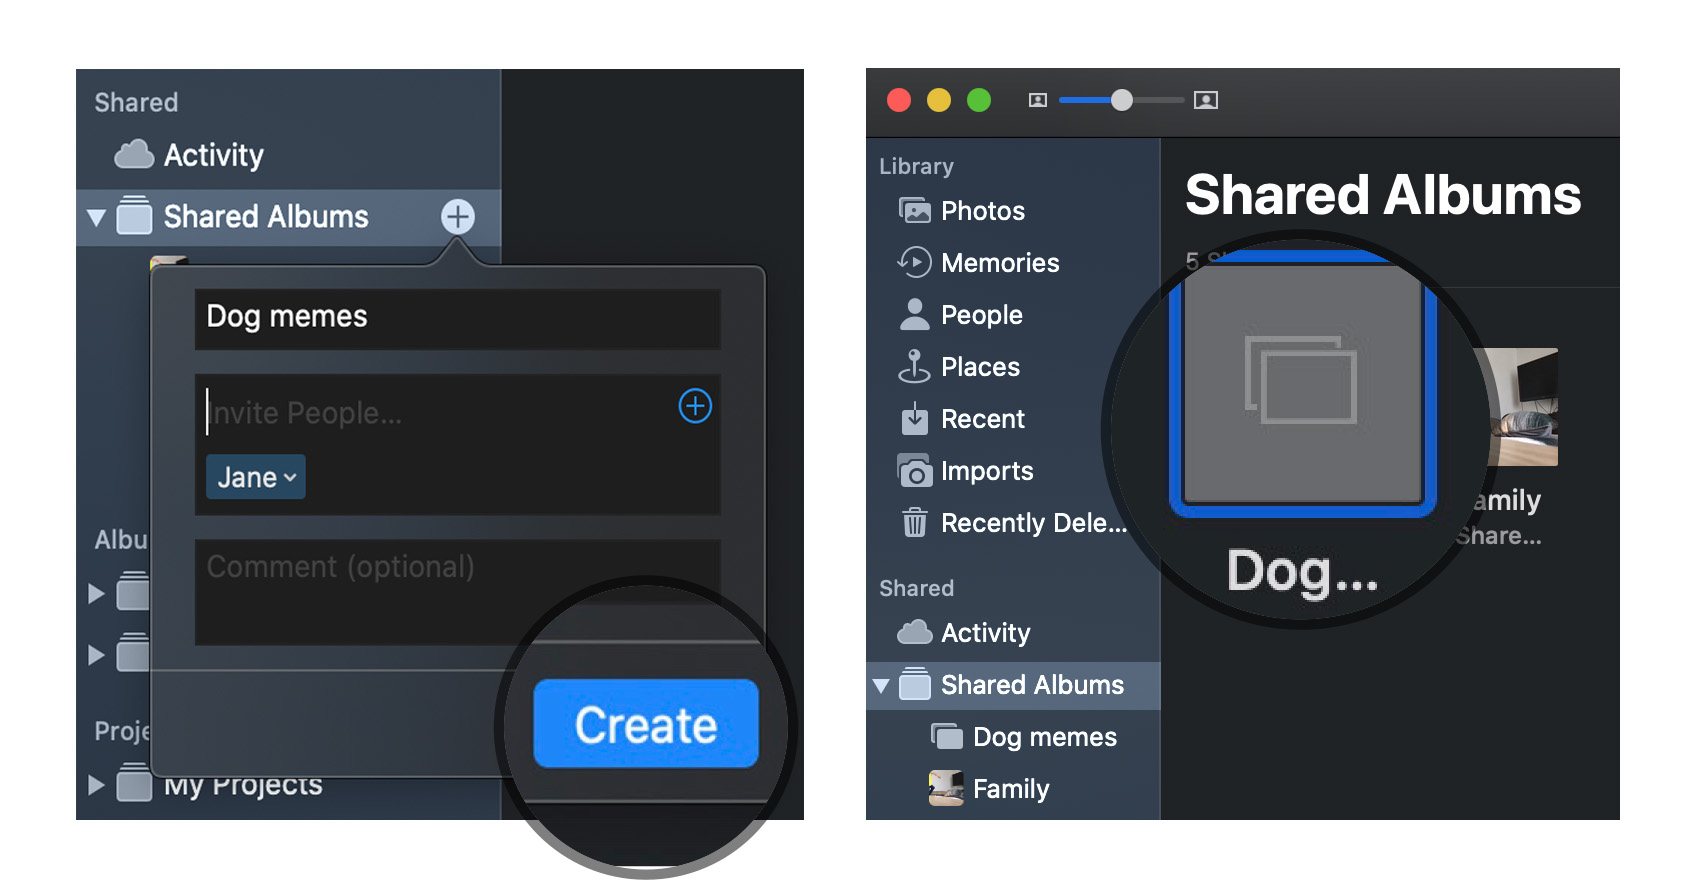 Create a Shared Photo Album on macOS by showing steps: Click create, double click on new Shared Album